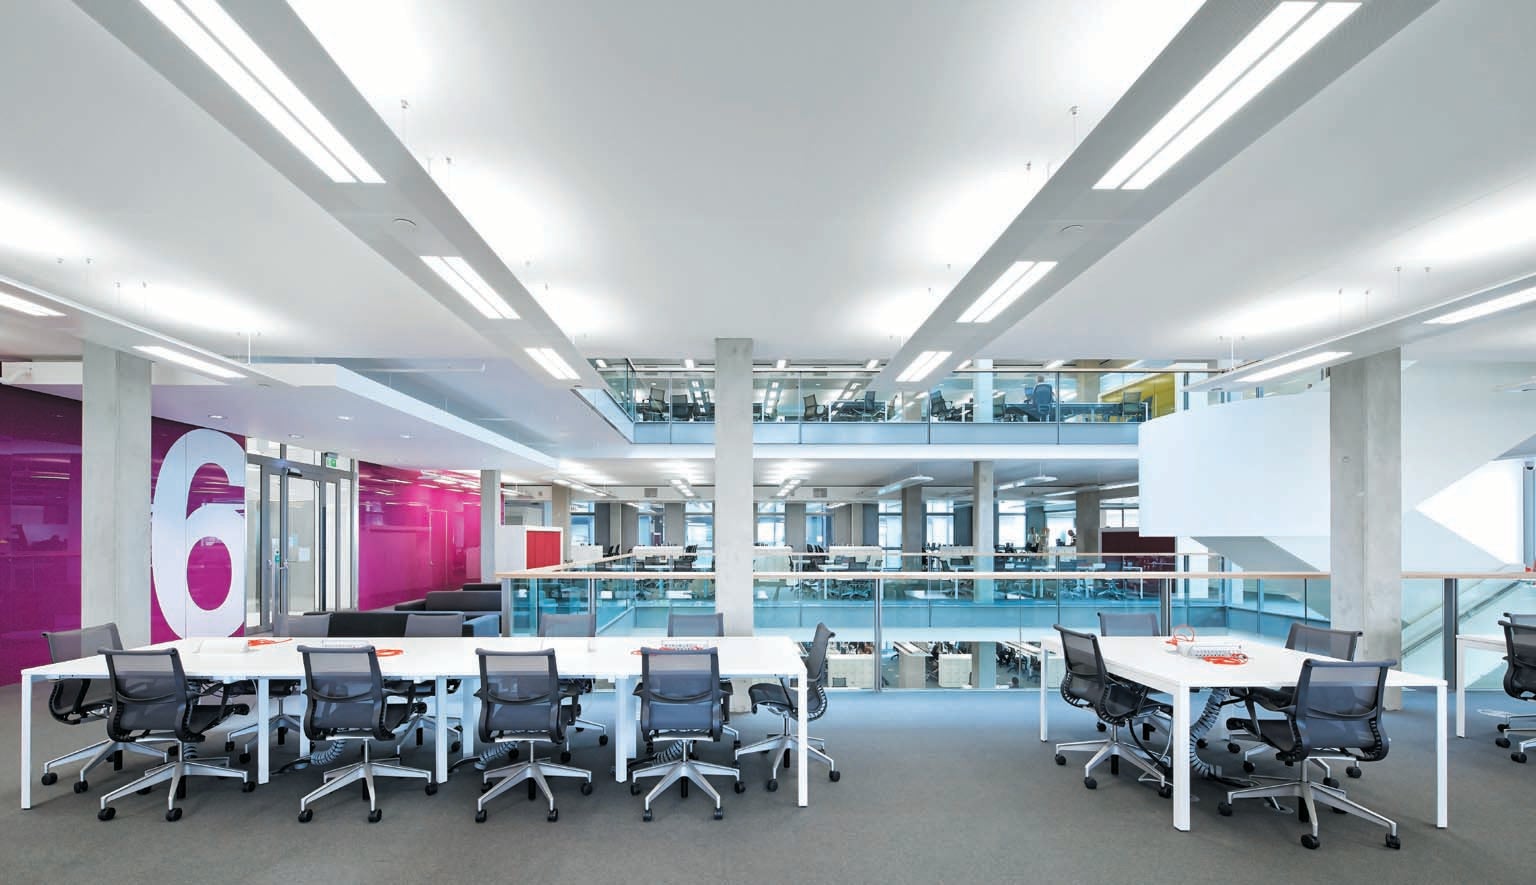 Interior view of open office plan space with harsh florescent lighting and shared seating area.